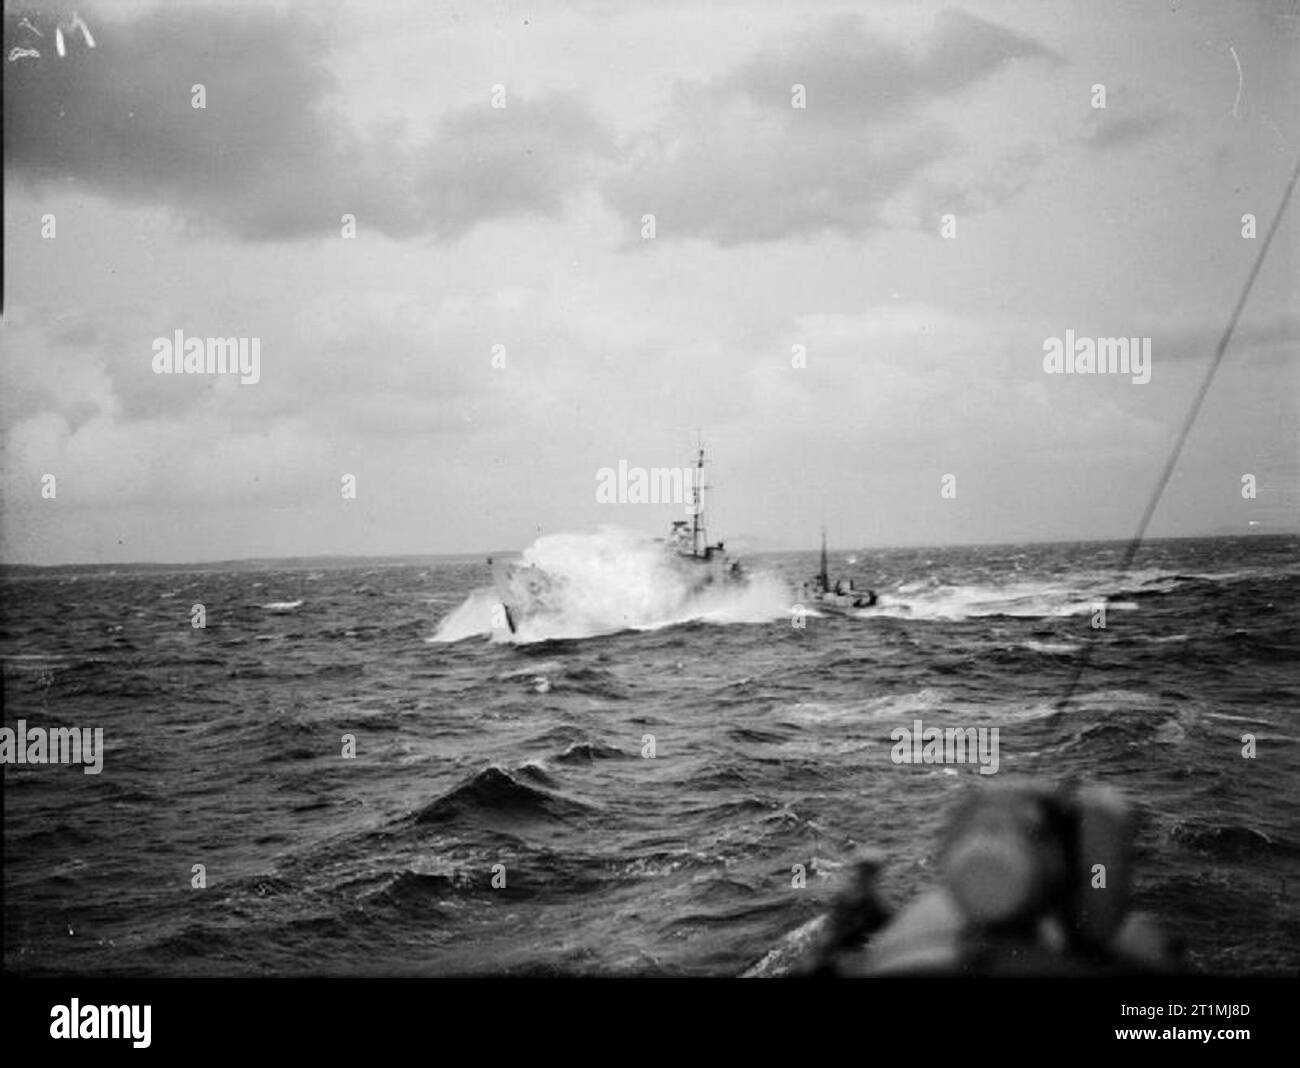 The Battle of the Atlantic 1939-1945 Convoys: A destroyer escort steaming through heavy seas while escorting a convoy. Stock Photo